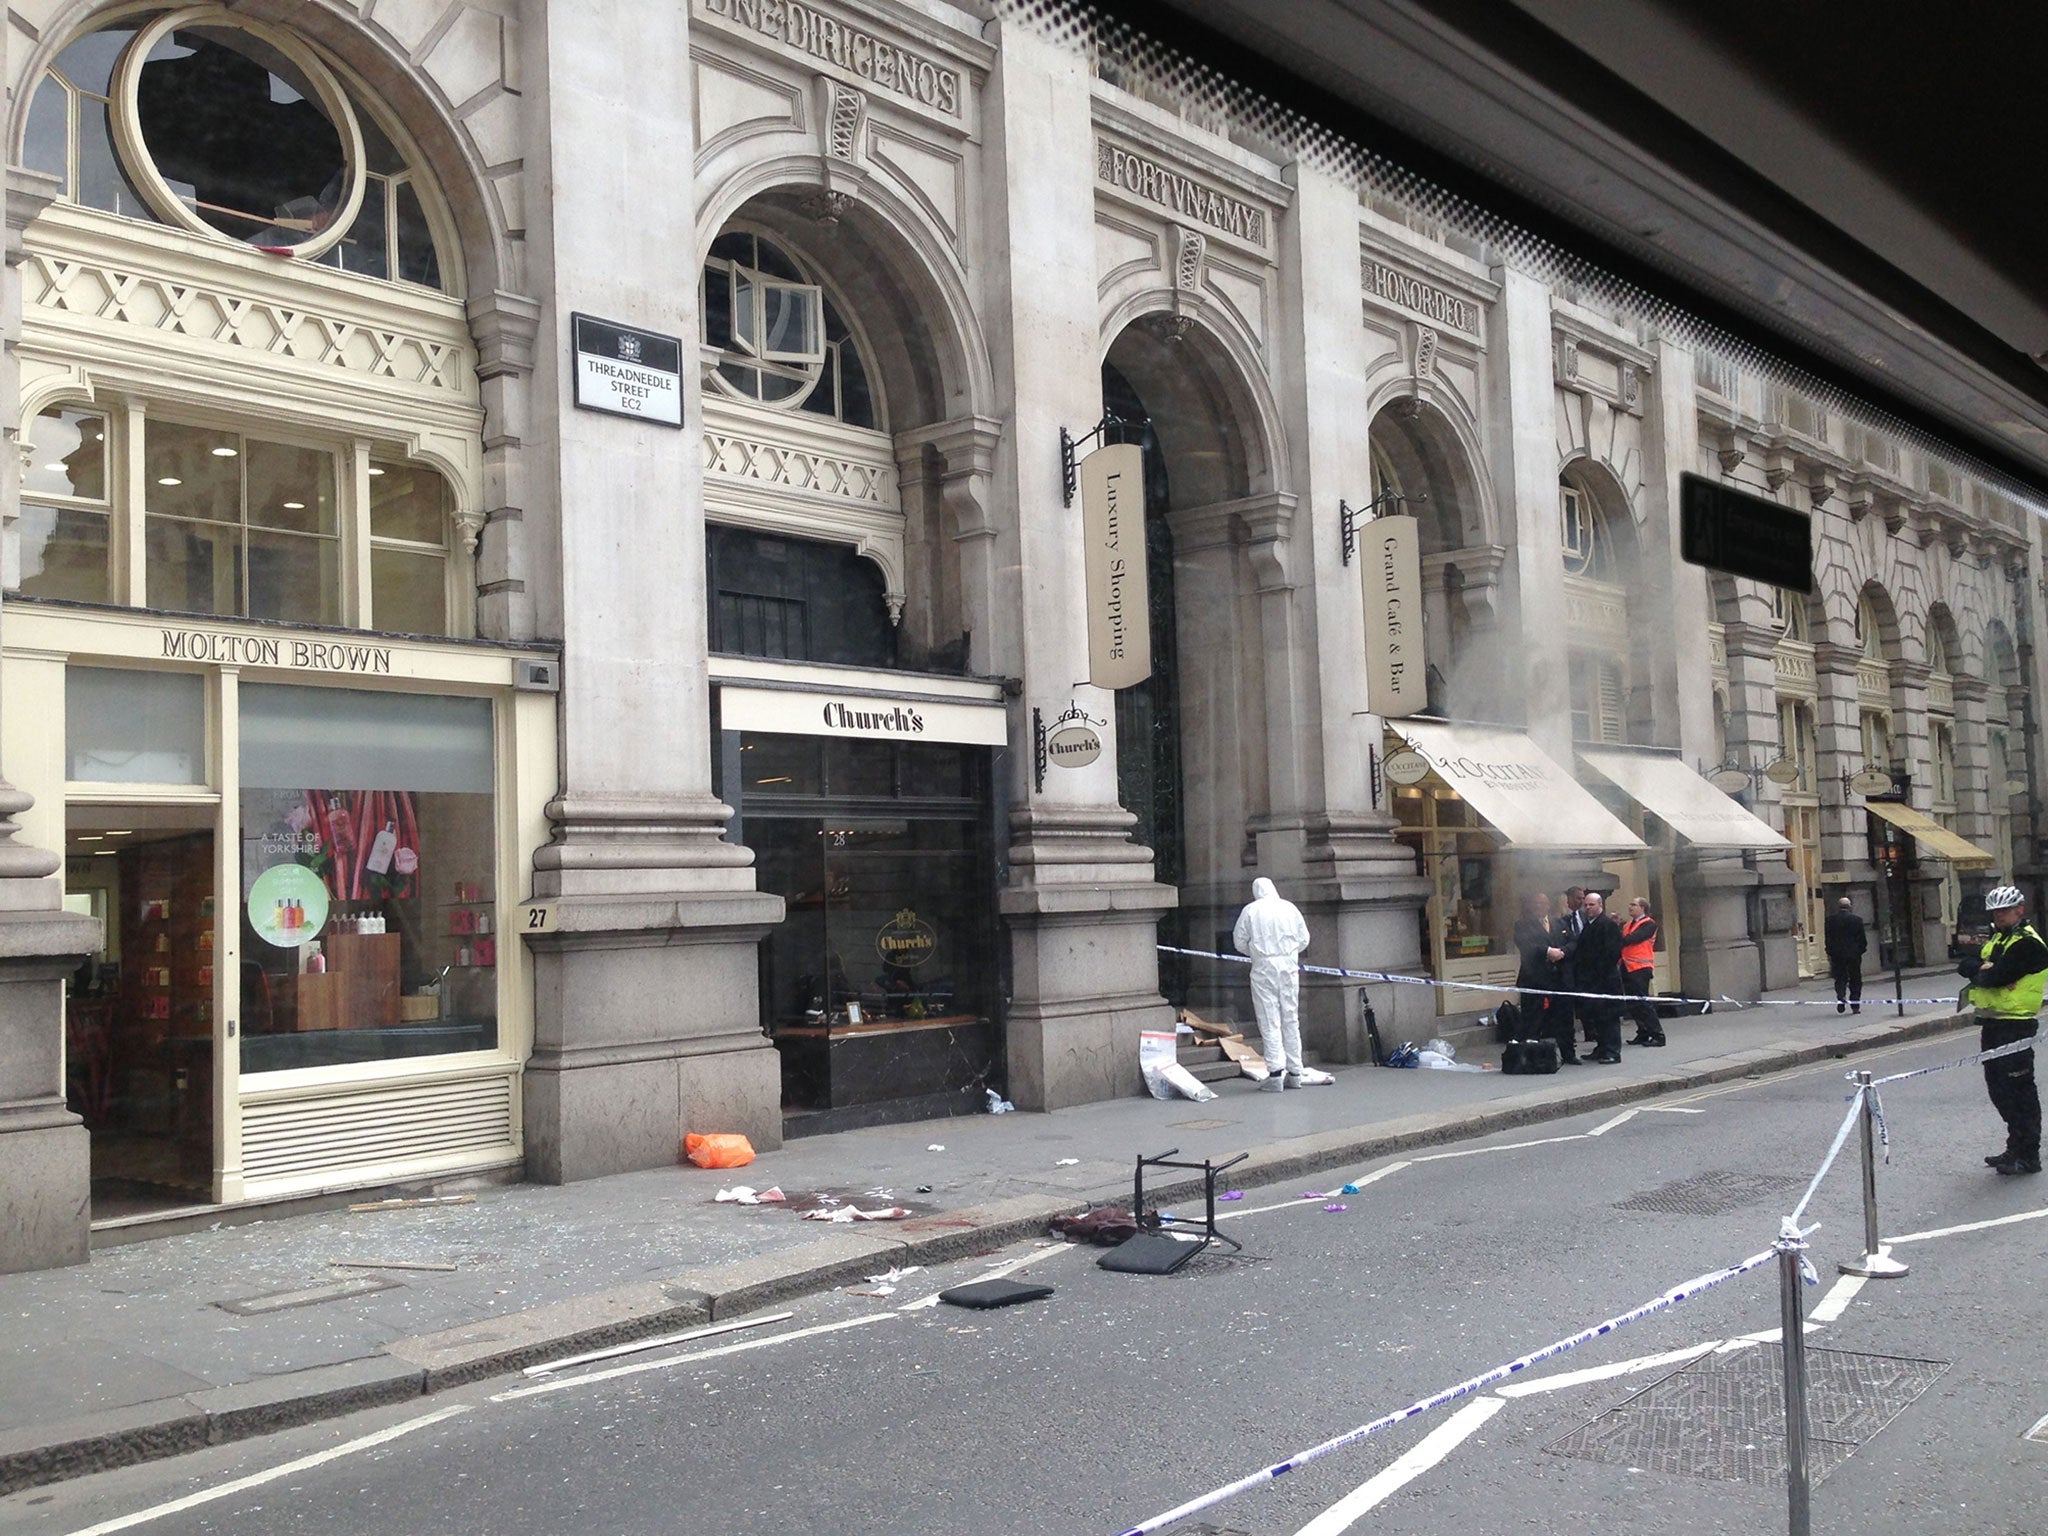 Suspected shoplifter injured after falling through window at Molton Brown store, London